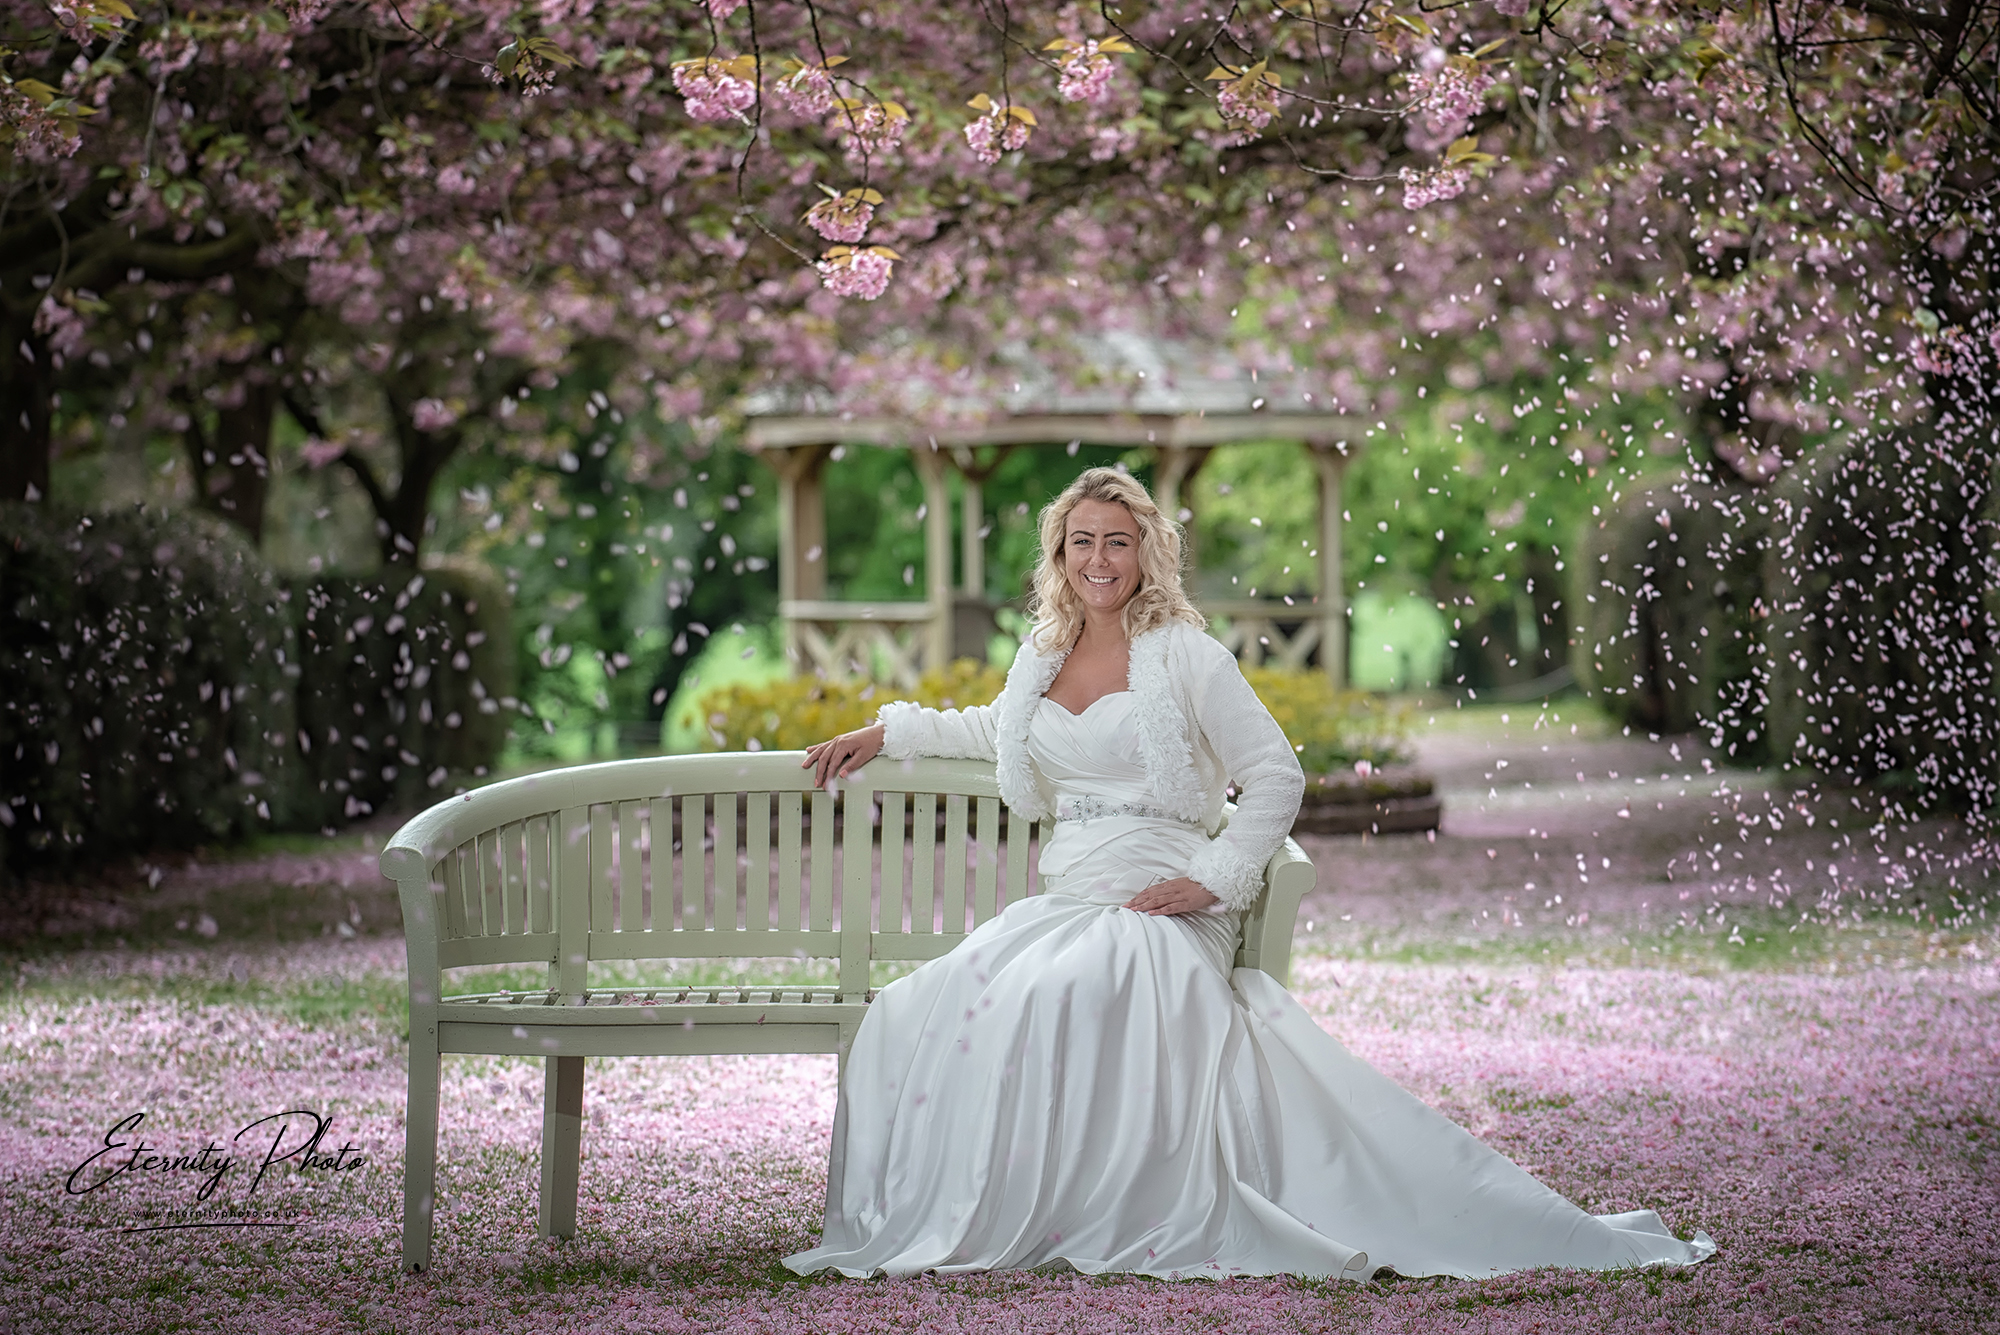 Woman in wedding dress under blossoming cherry trees.